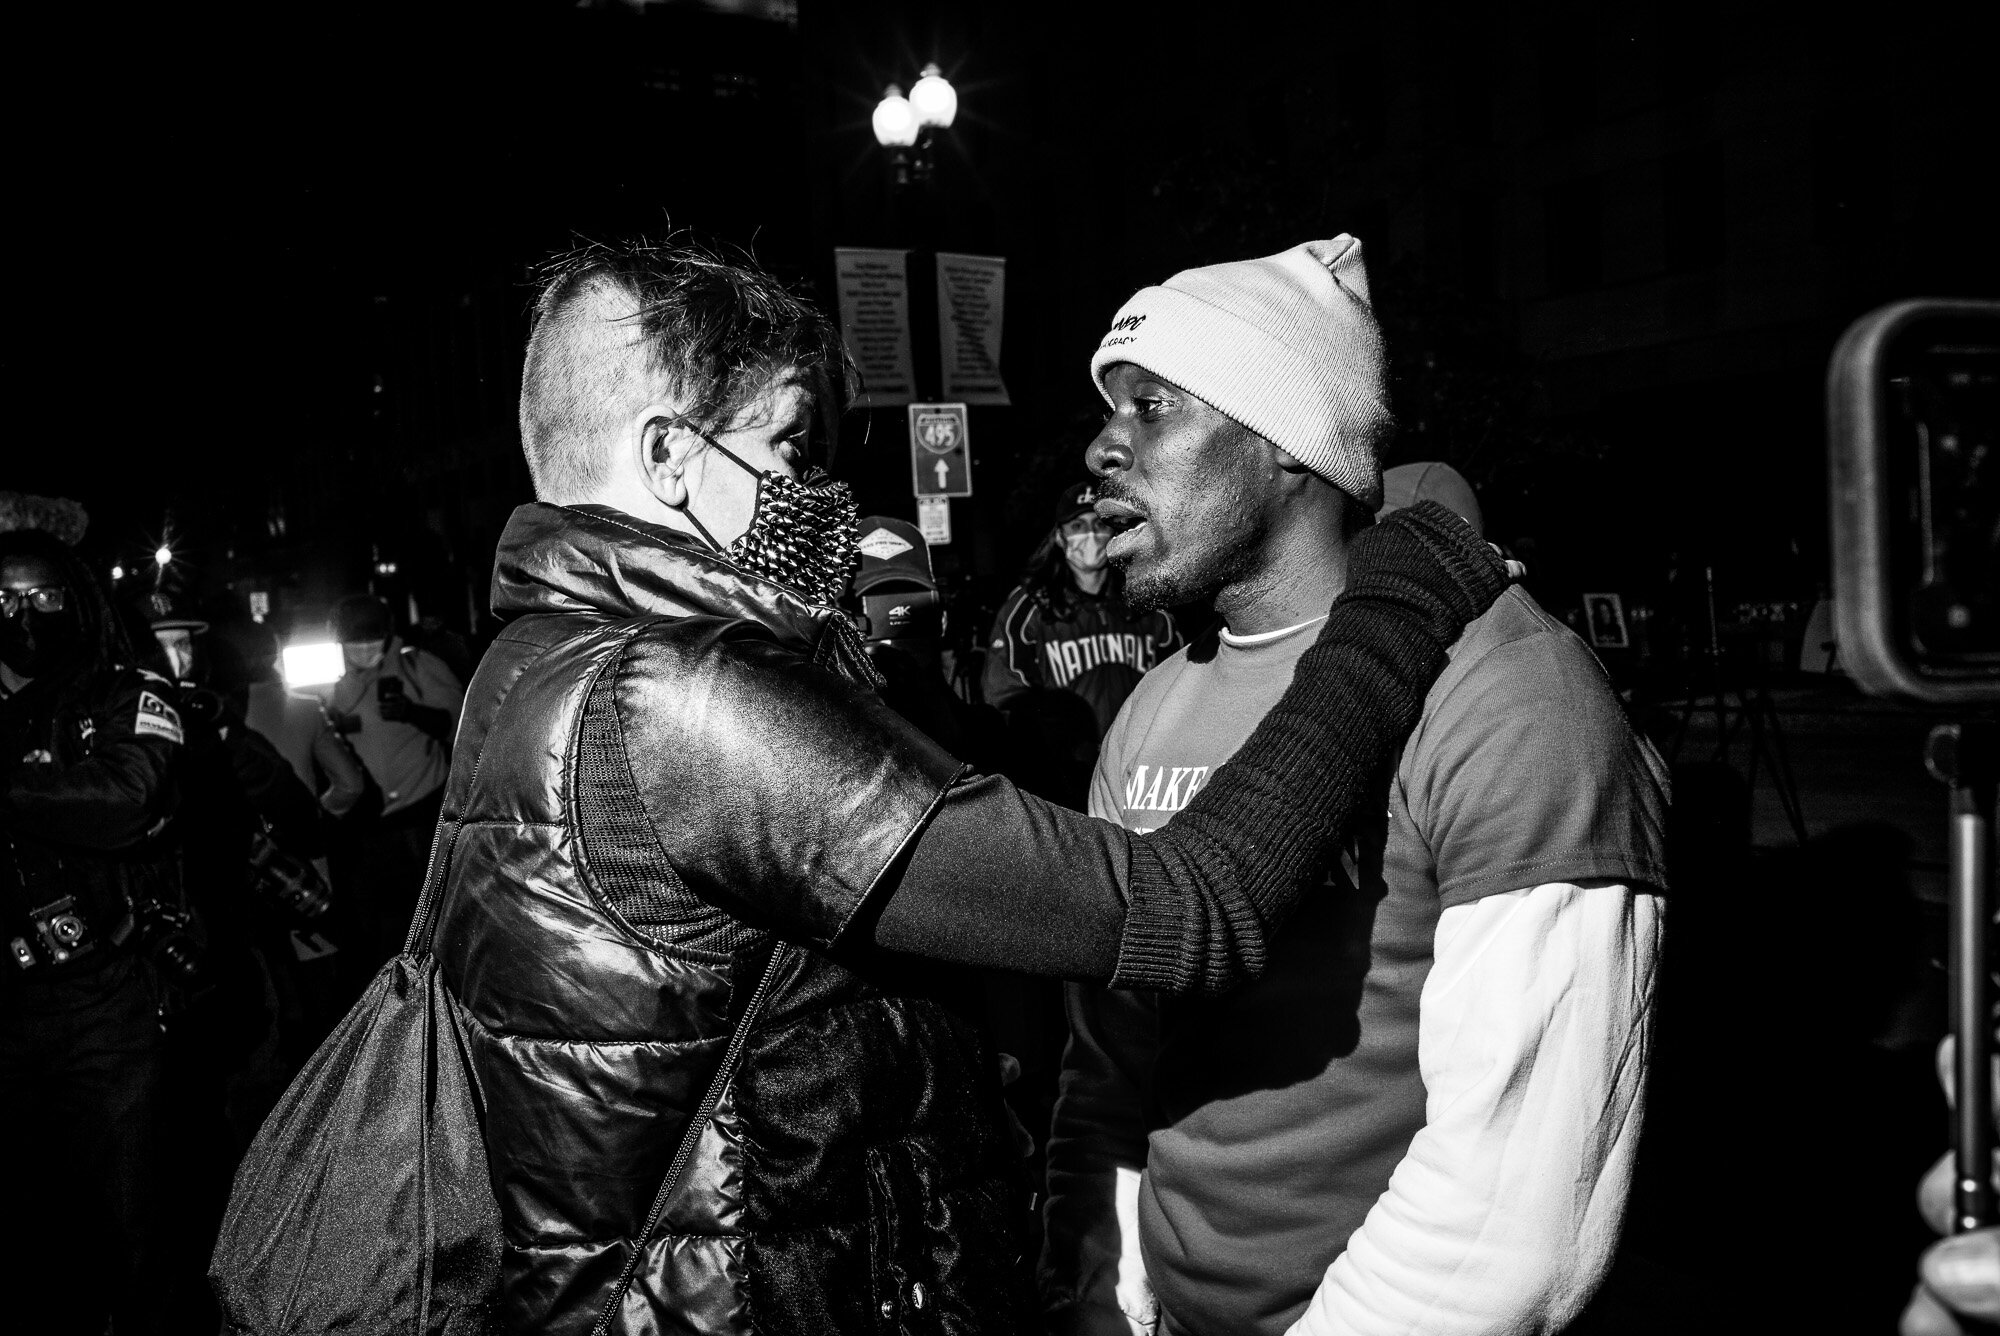  BLM Protestor talks with a Trump Supporter at Black Lives Matter Plaza in Washington, DC. 